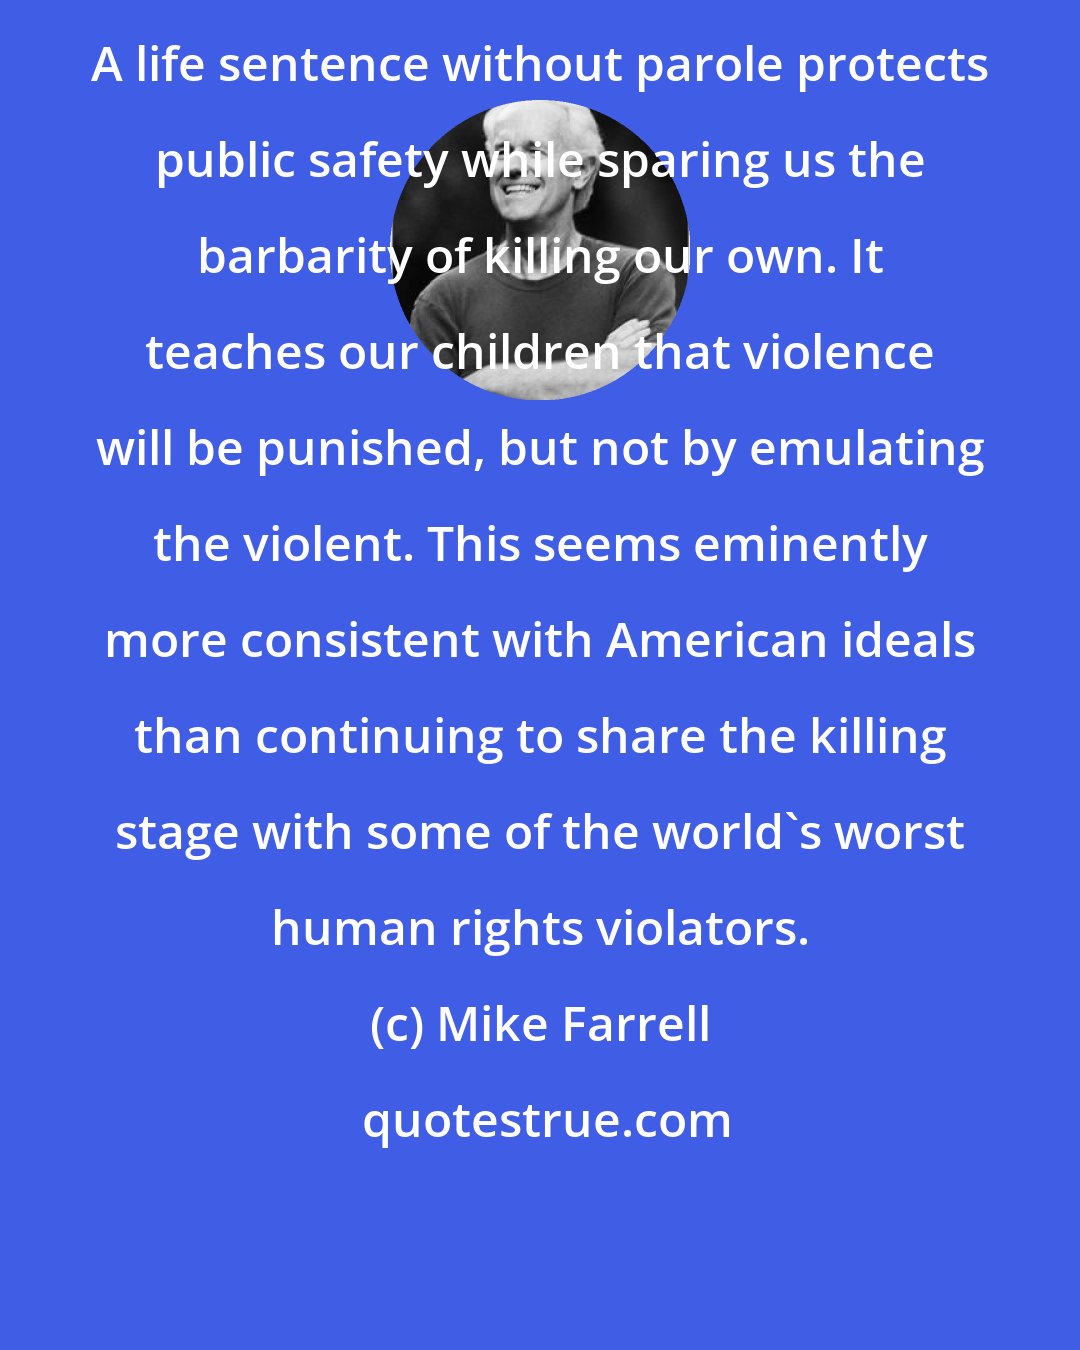 Mike Farrell: A life sentence without parole protects public safety while sparing us the barbarity of killing our own. It teaches our children that violence will be punished, but not by emulating the violent. This seems eminently more consistent with American ideals than continuing to share the killing stage with some of the world's worst human rights violators.